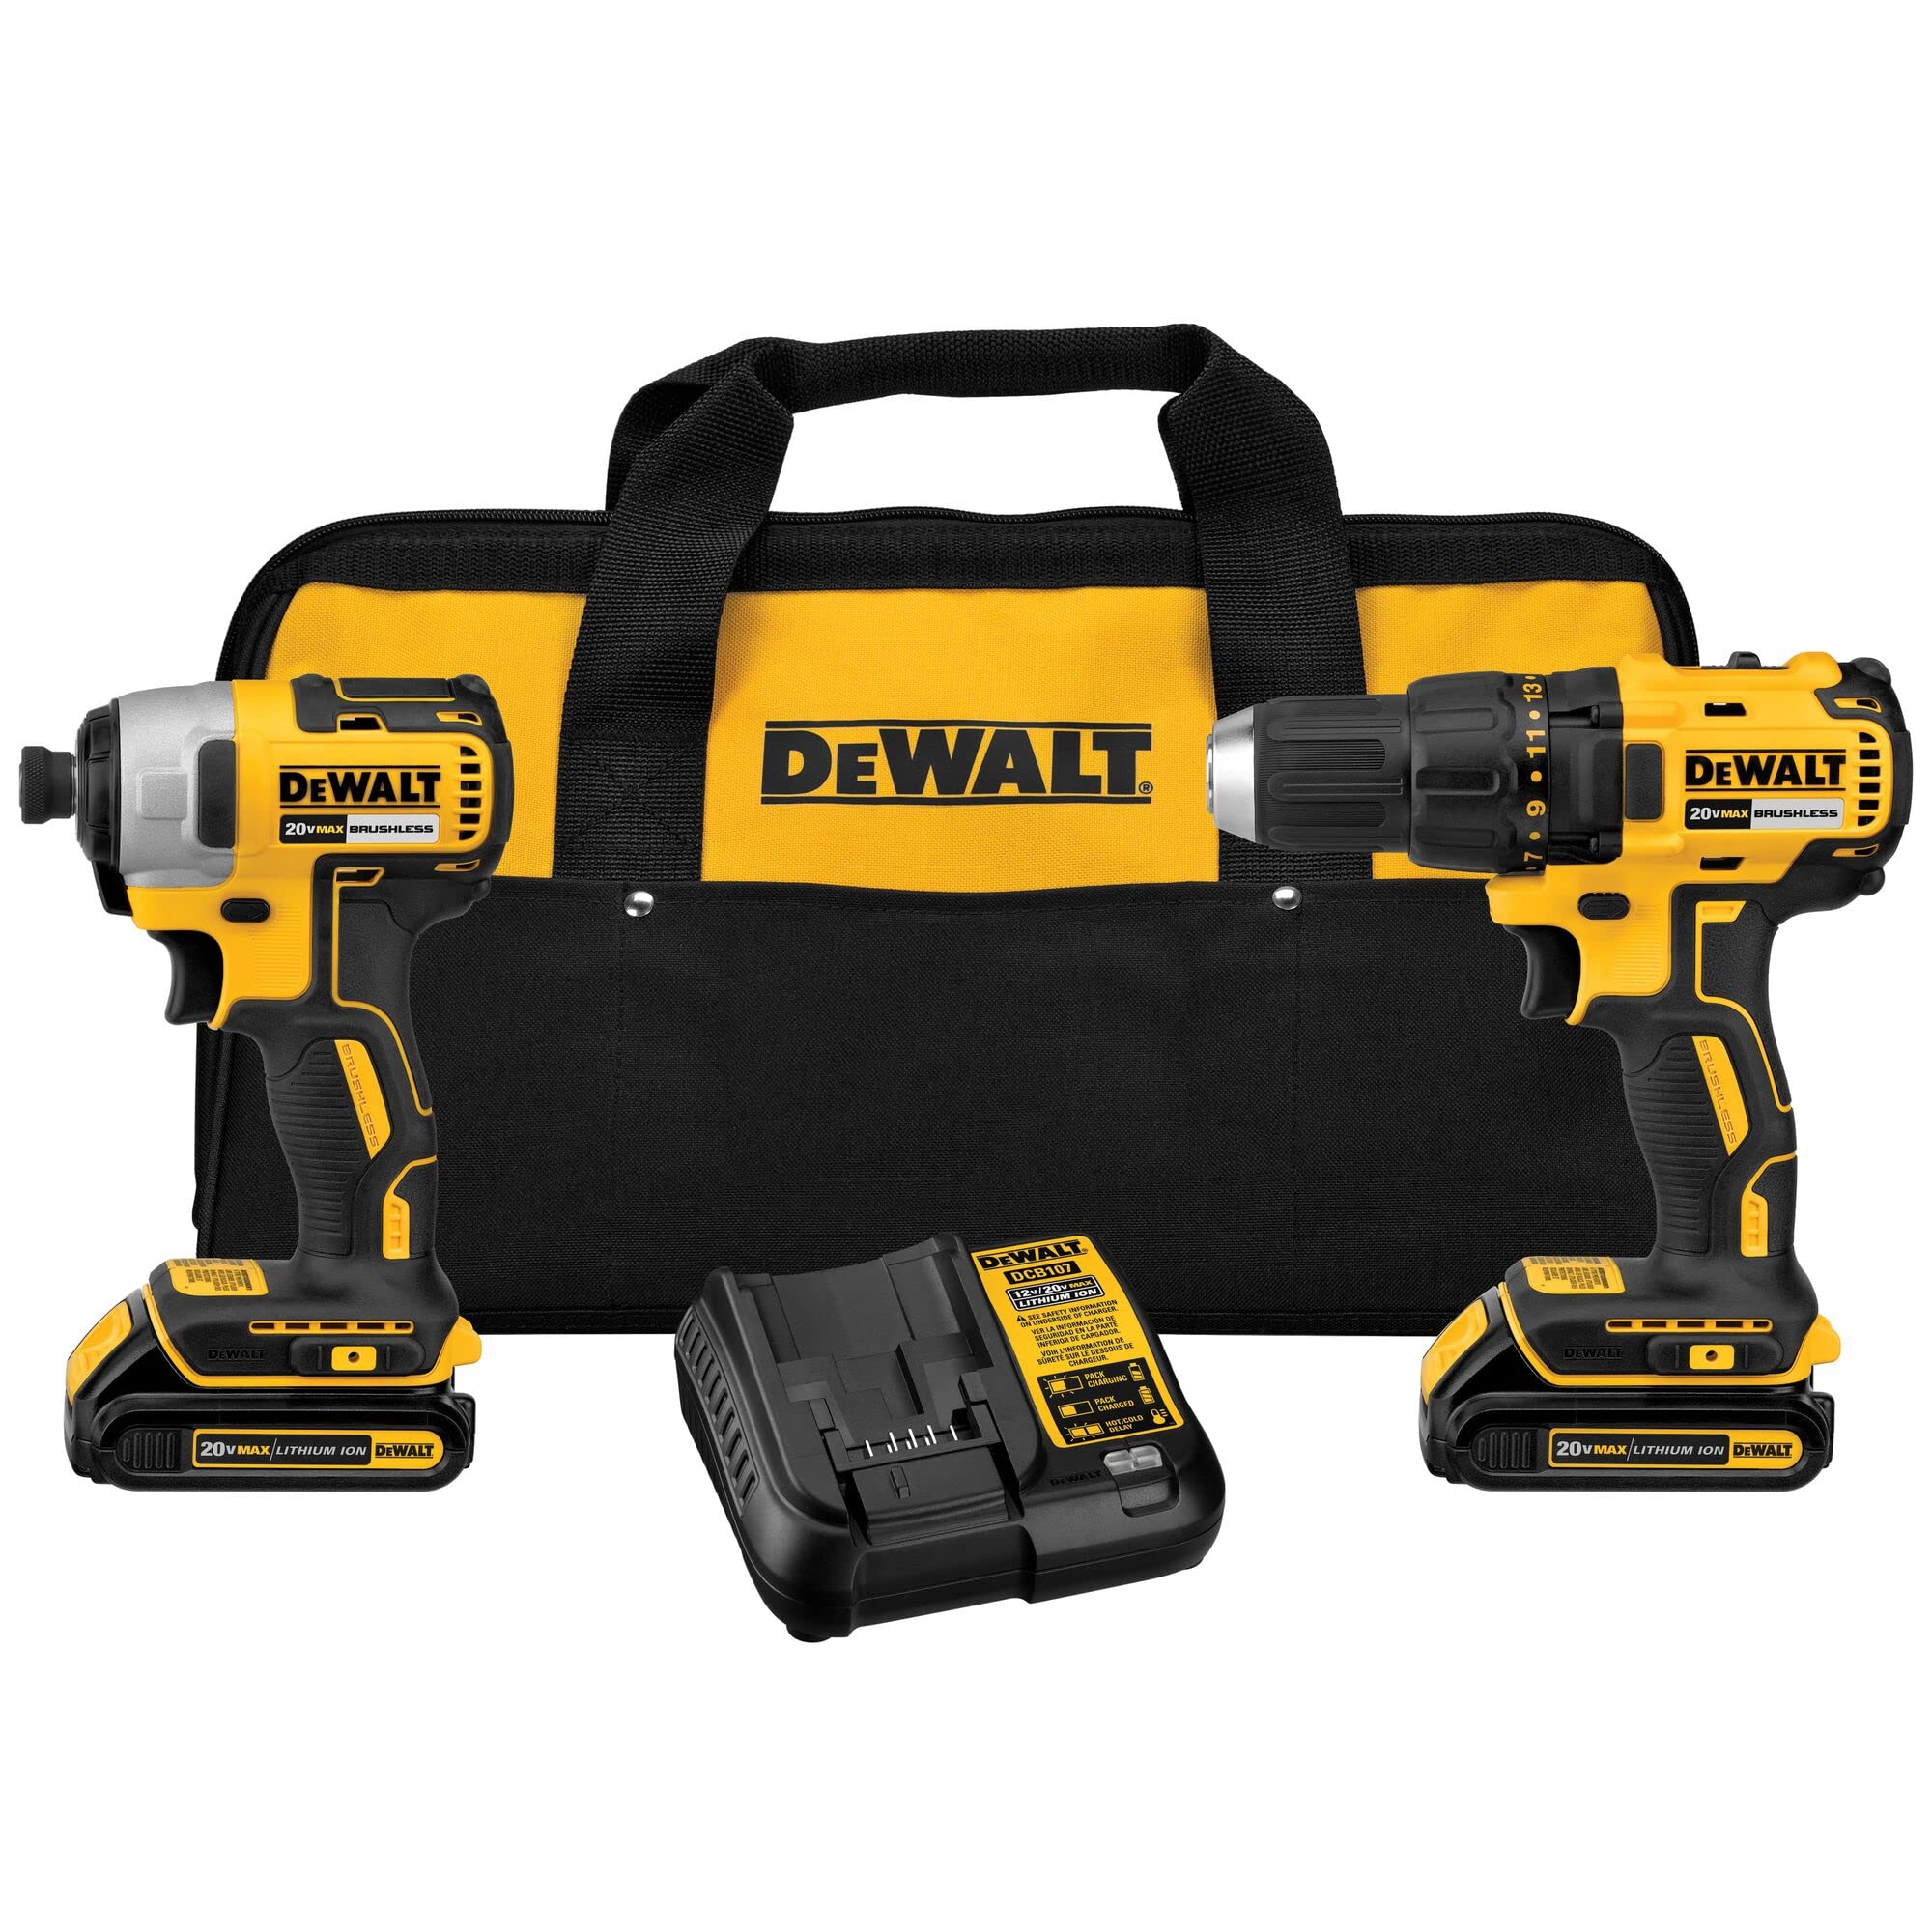 DEWALT 20V MAX Cordless Drill and Impact Driver, Power Tool Combo Kit with 2 Batteries and Charger (DCK240C2) $139